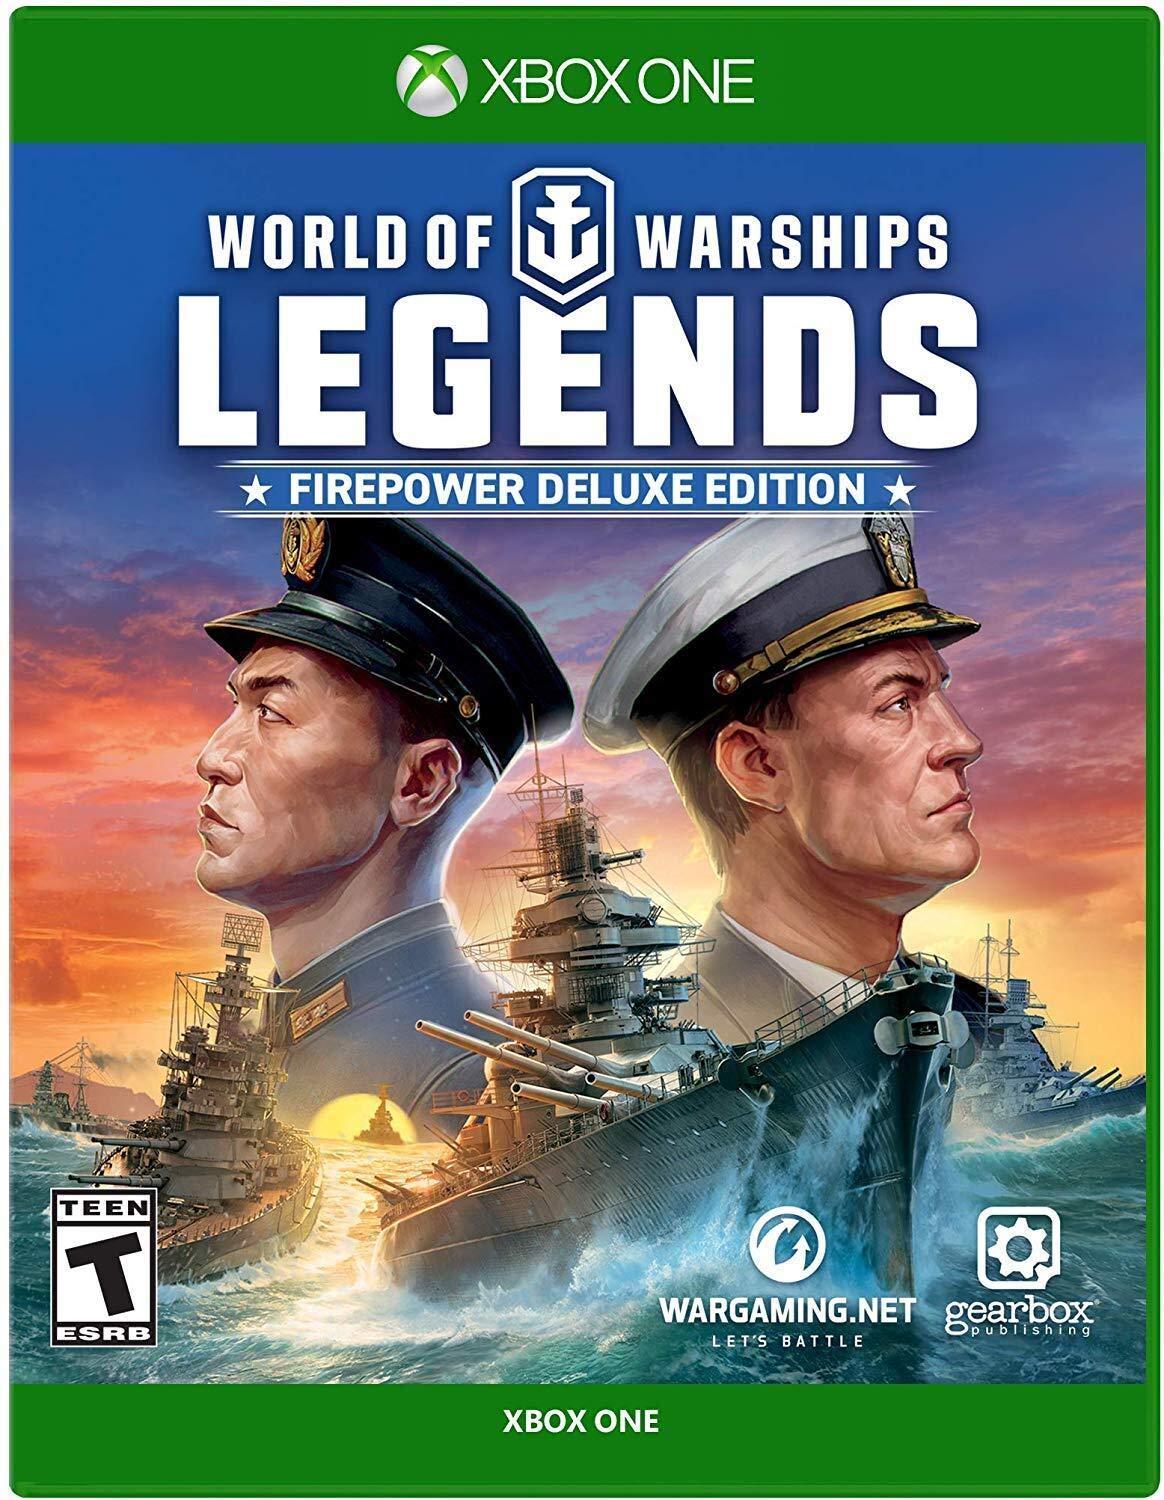 World of Warships Legends [Firepower Deluxe Edition] - Xbox One | Galactic Gamez